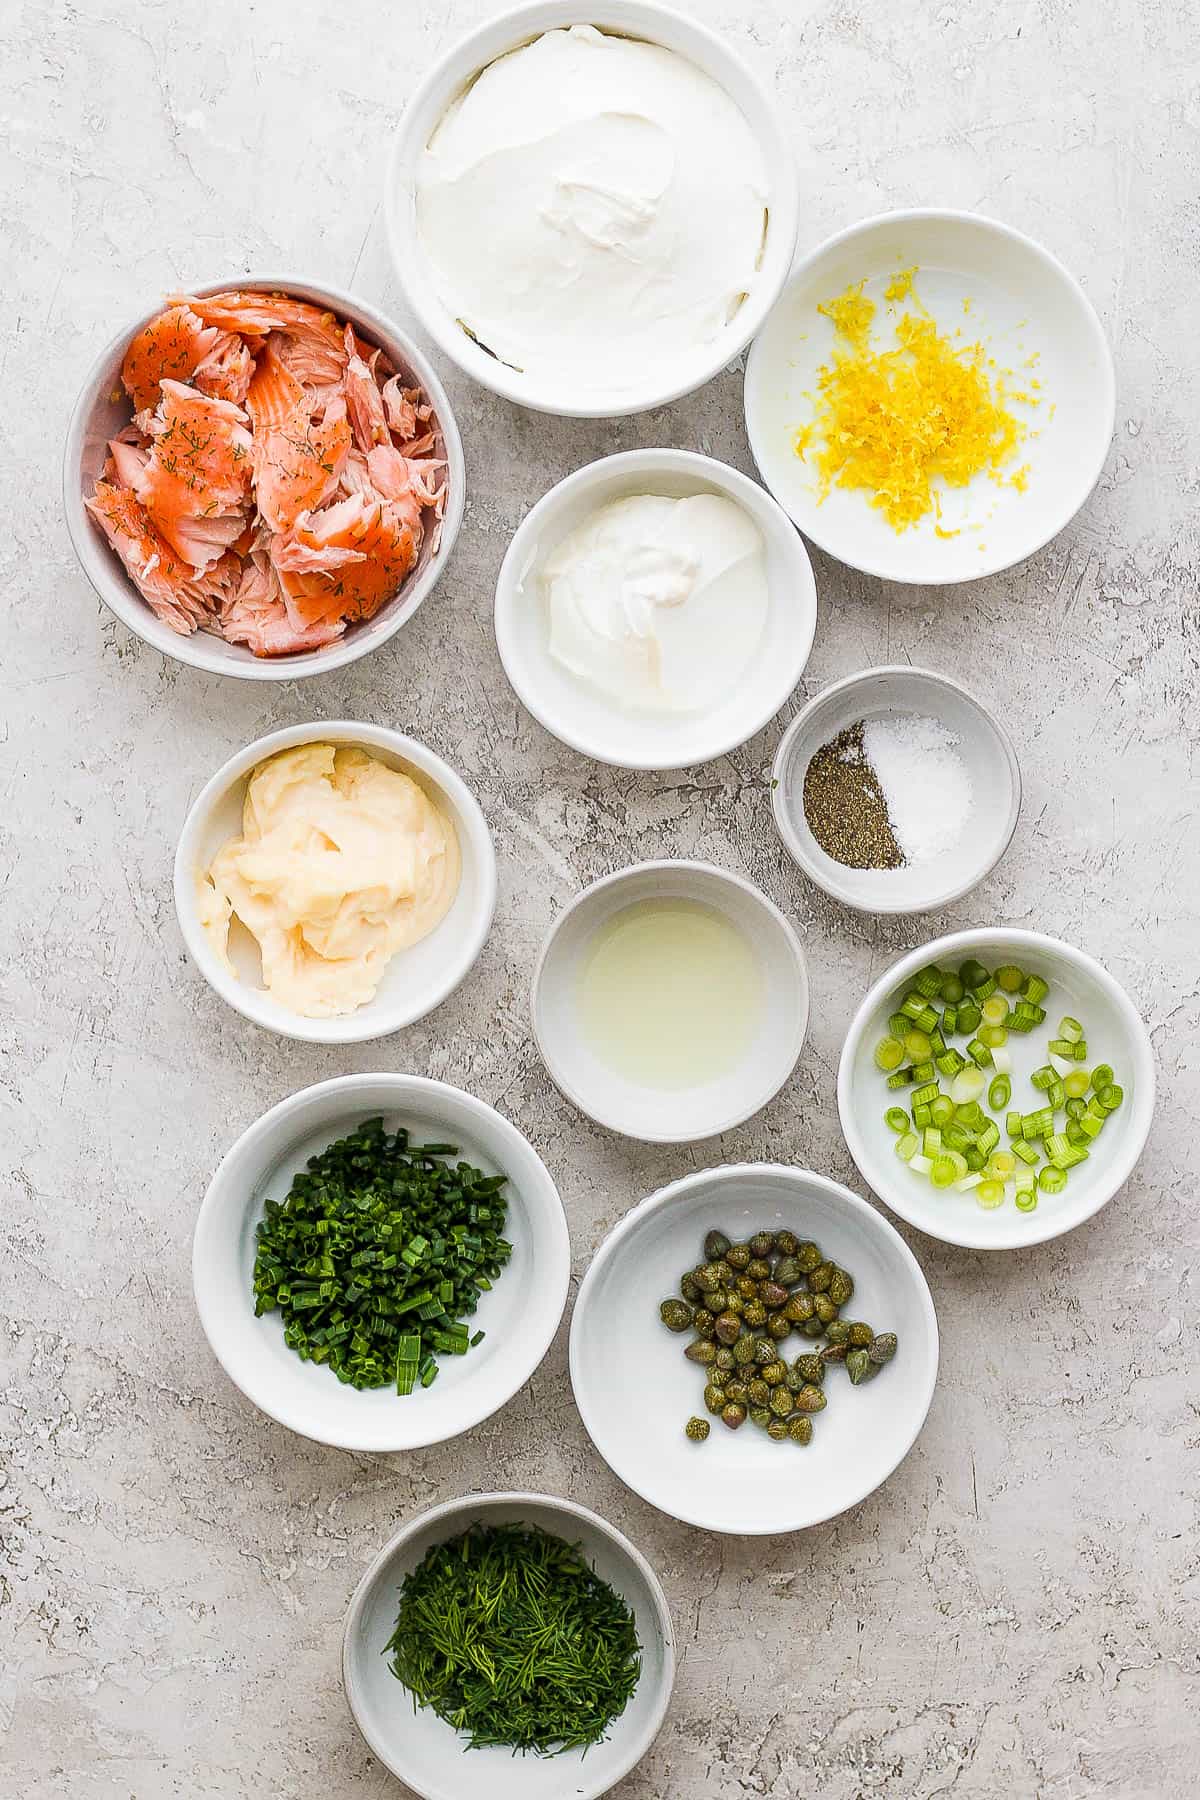 Eleven ingredient bowls each with a separate ingredient: smoked salmon, lemon zest, lemon juice, capers, chives, scallions, mayo, sour cream, dill, salt and pepper.